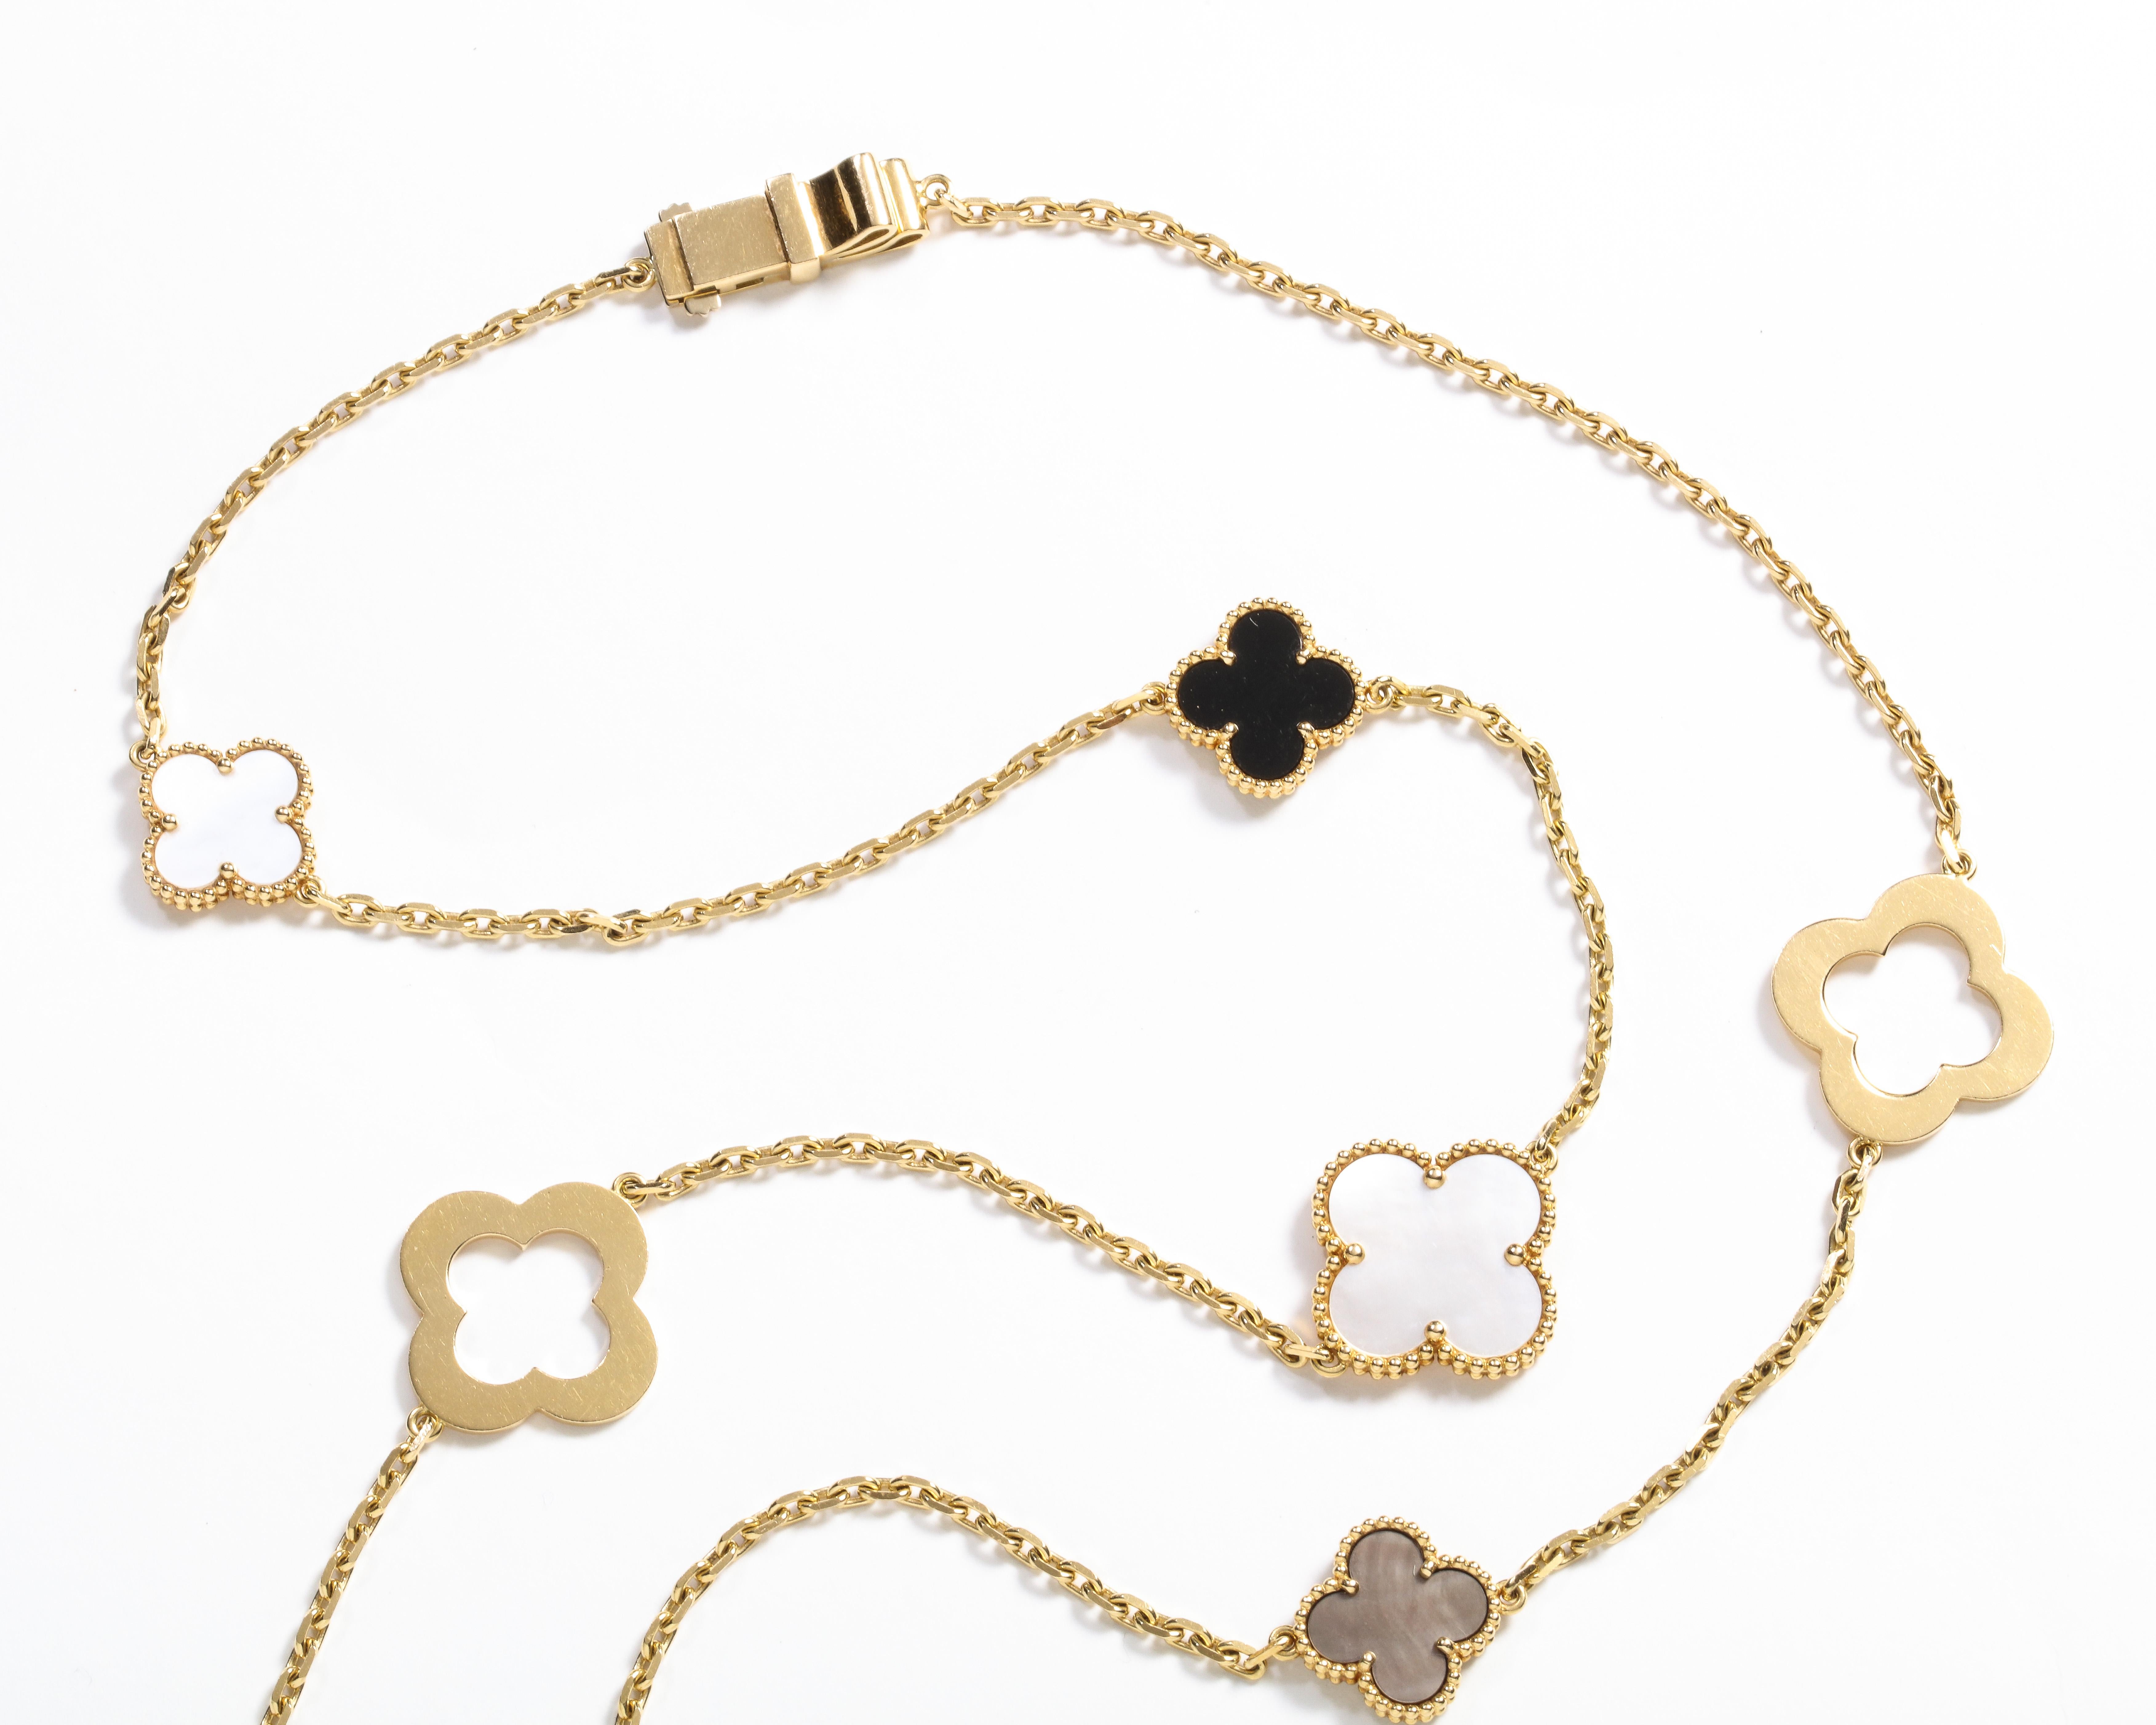 Van Cleef & Arpels & Chloe, a Rare, Limited-Edition 18K Gold Alhambra Necklace 3